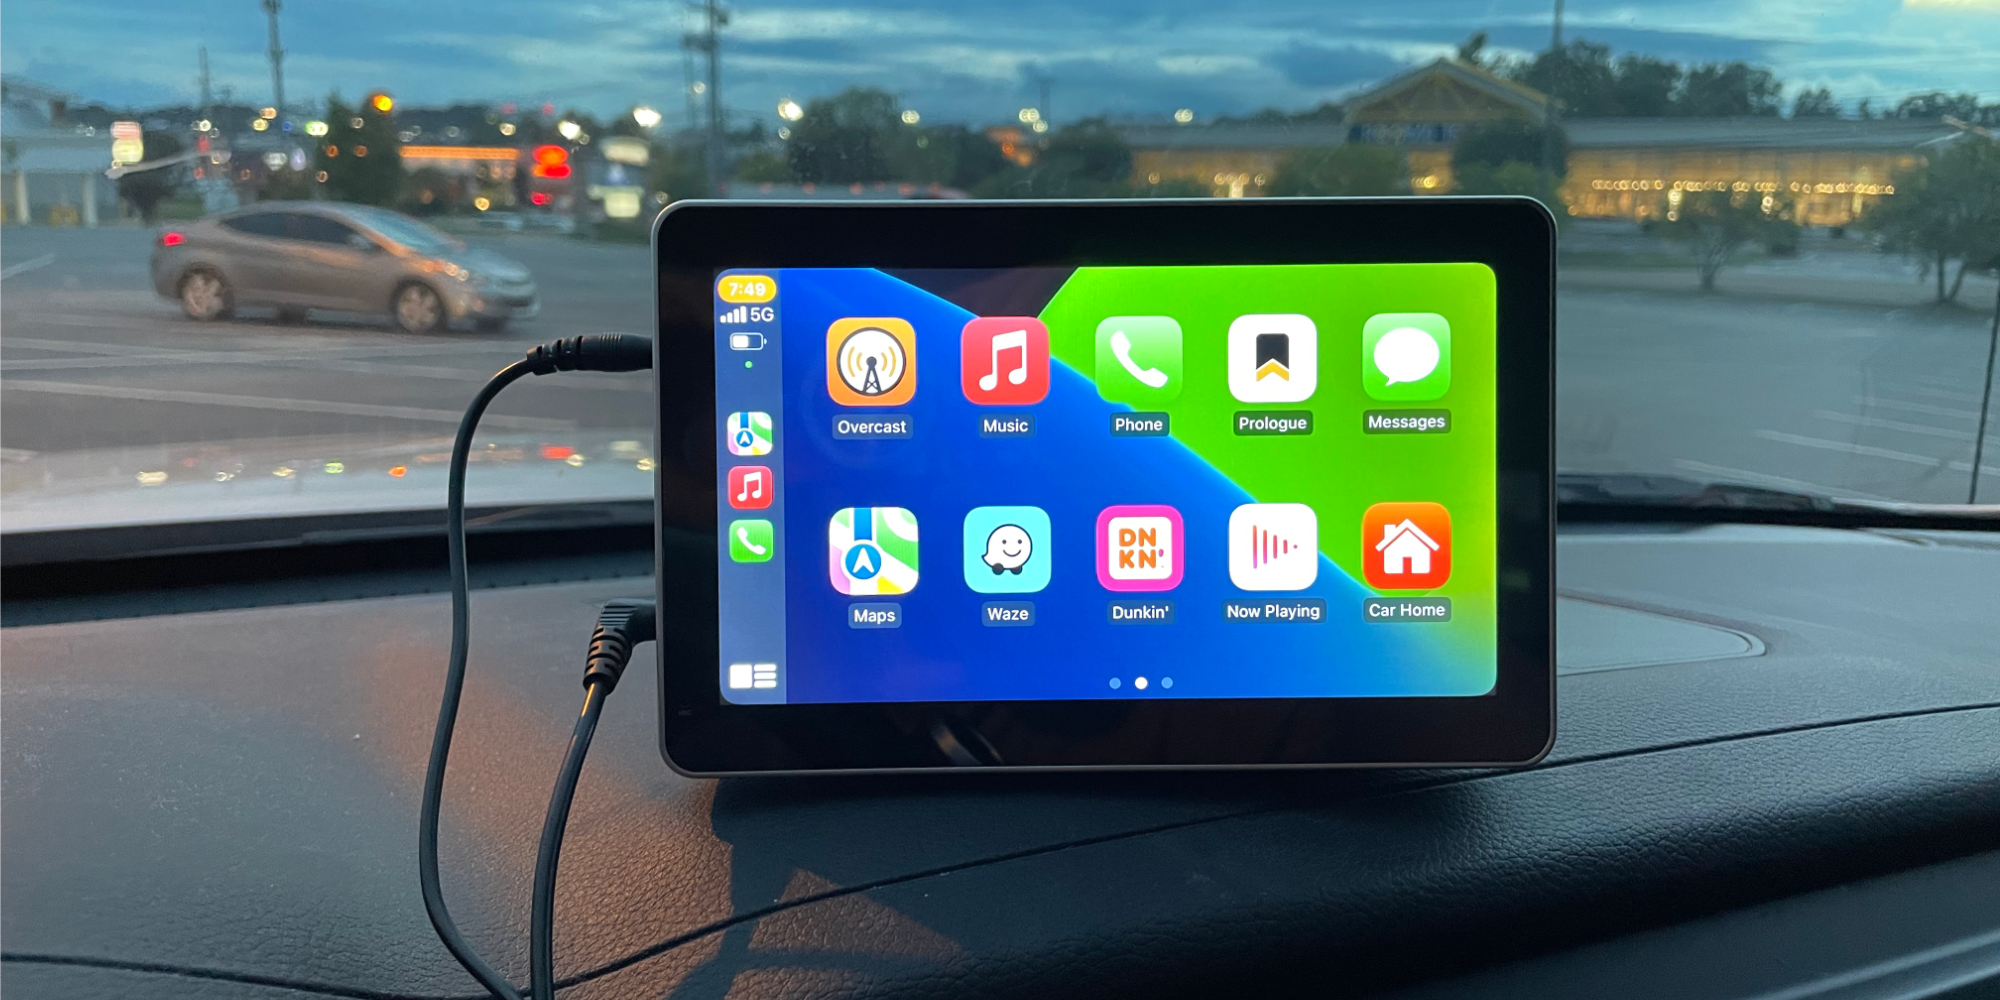 Afspraak Sicilië Champagne Intellidash Pro is an external CarPlay unit that works with any car -  9to5Mac